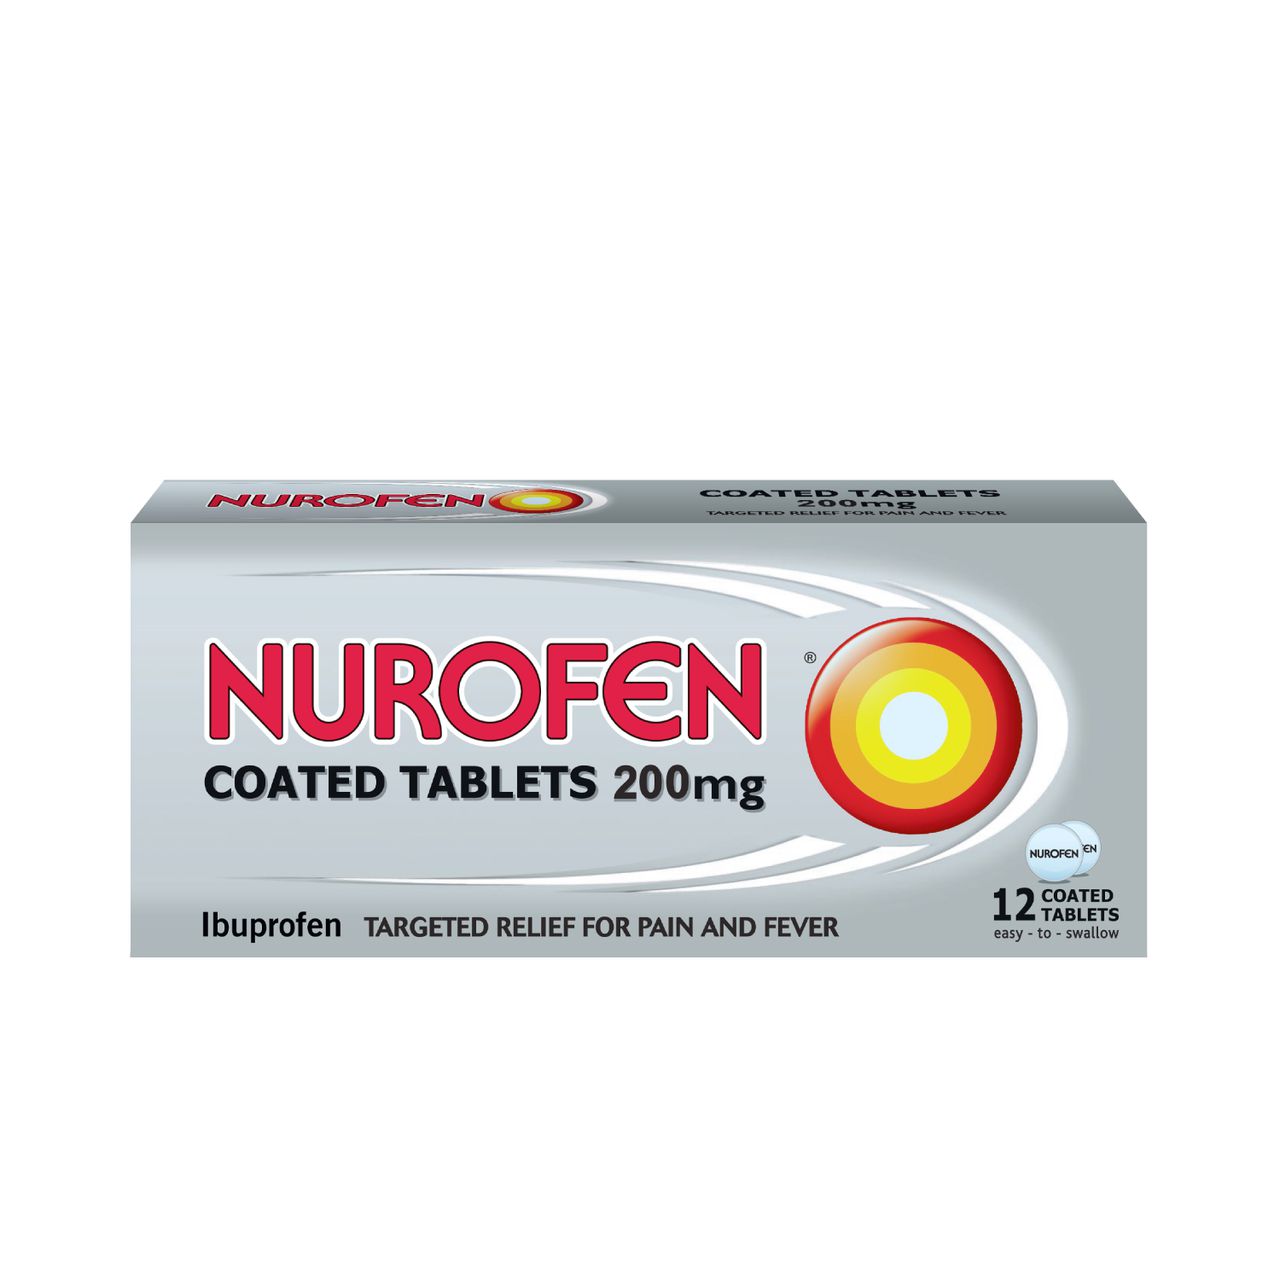 nurofen-tablets-for-headaches-and-pain-relief-nurofen-singapore